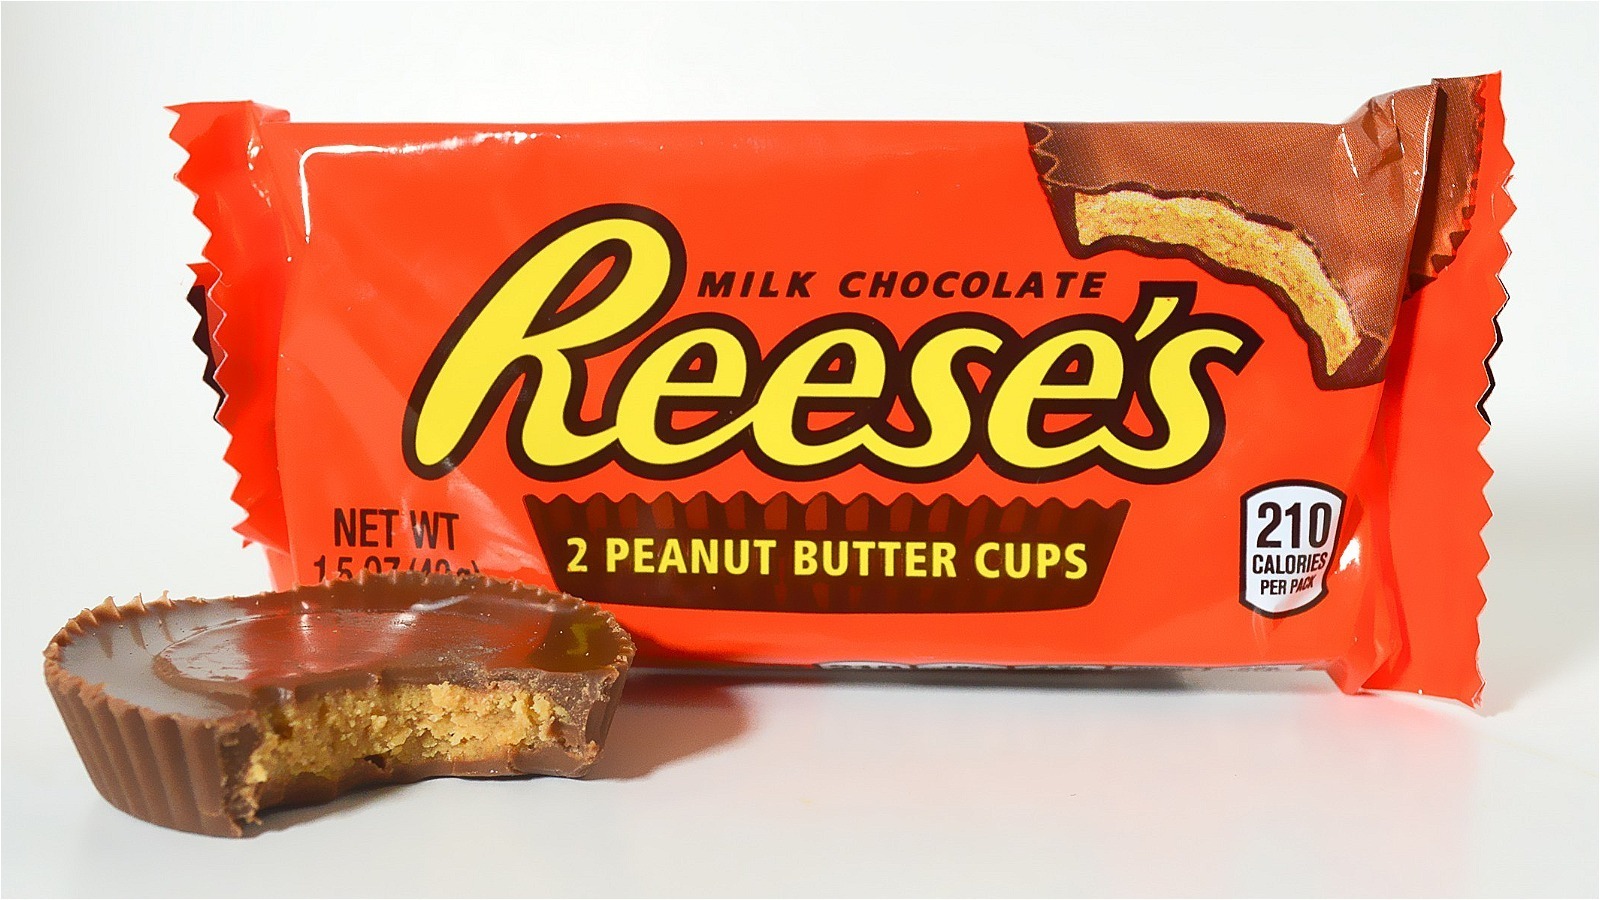 https://www.mashed.com/img/gallery/the-fan-favorite-cereal-reeses-is-adding-to-its-peanut-butter-cups/l-intro-1664499330.jpg